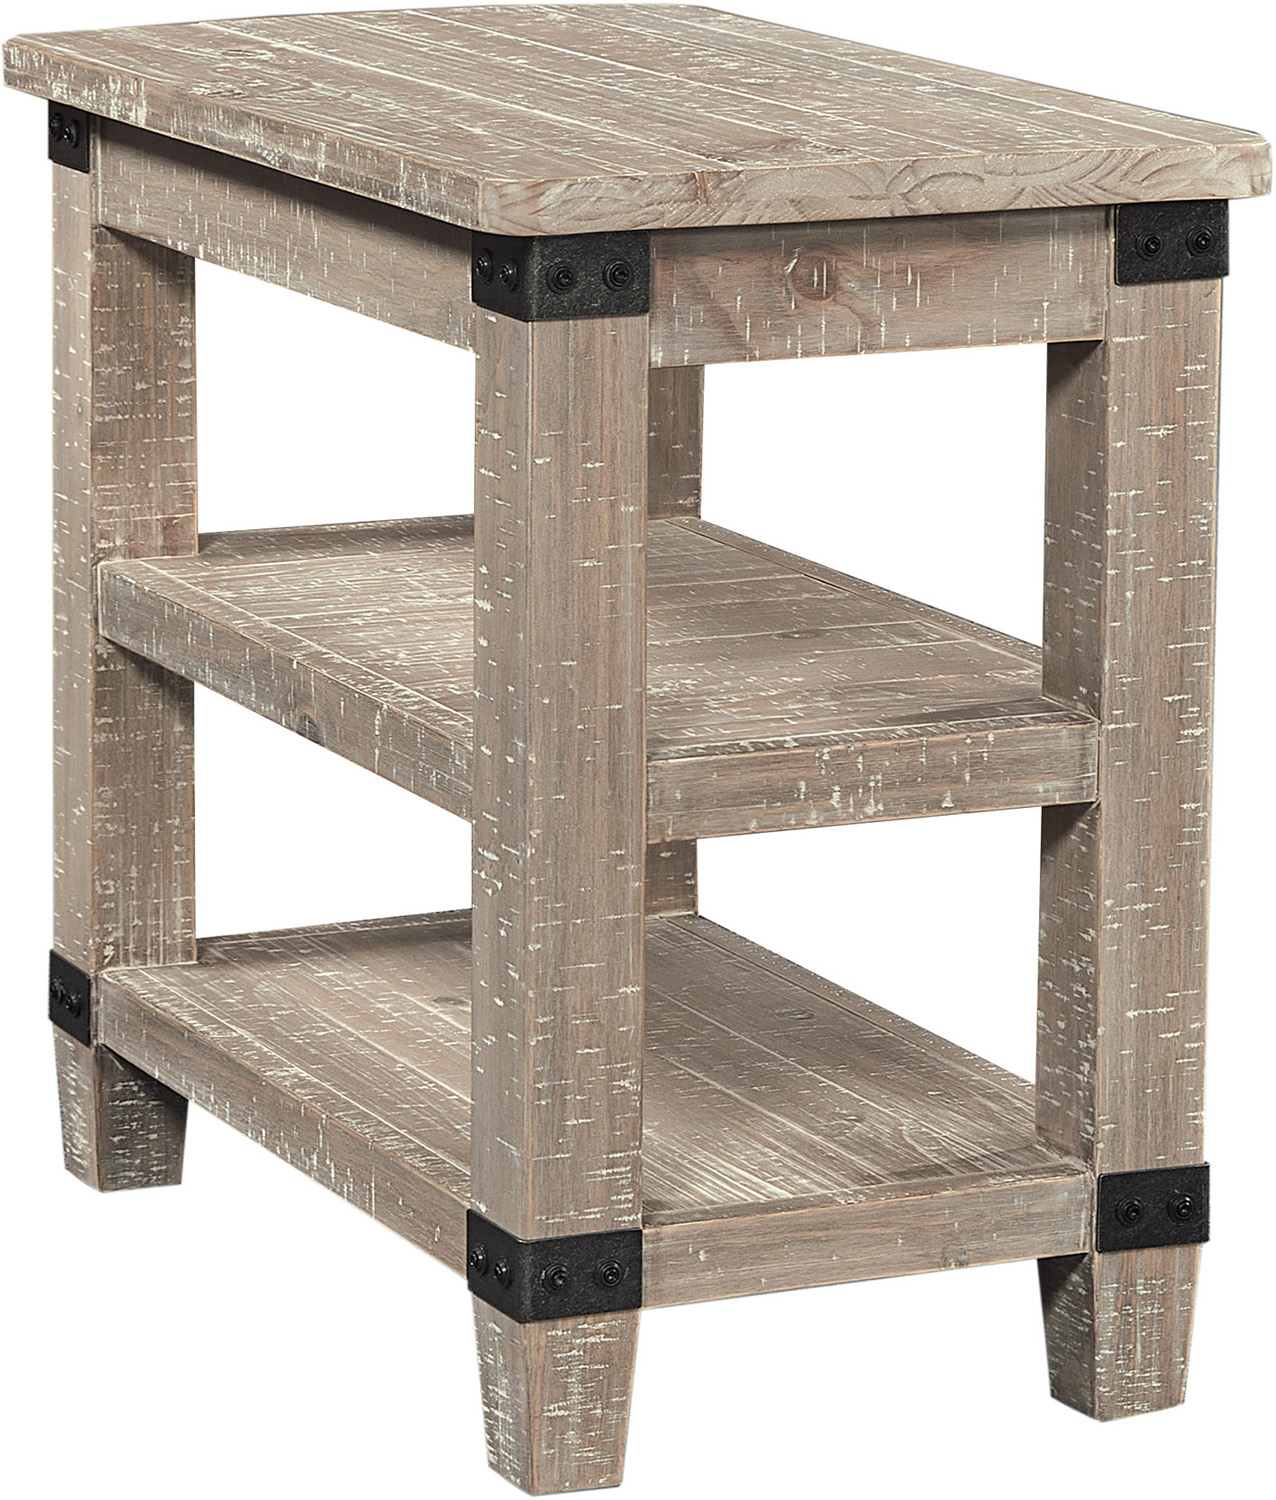 Foundry Chairside Table